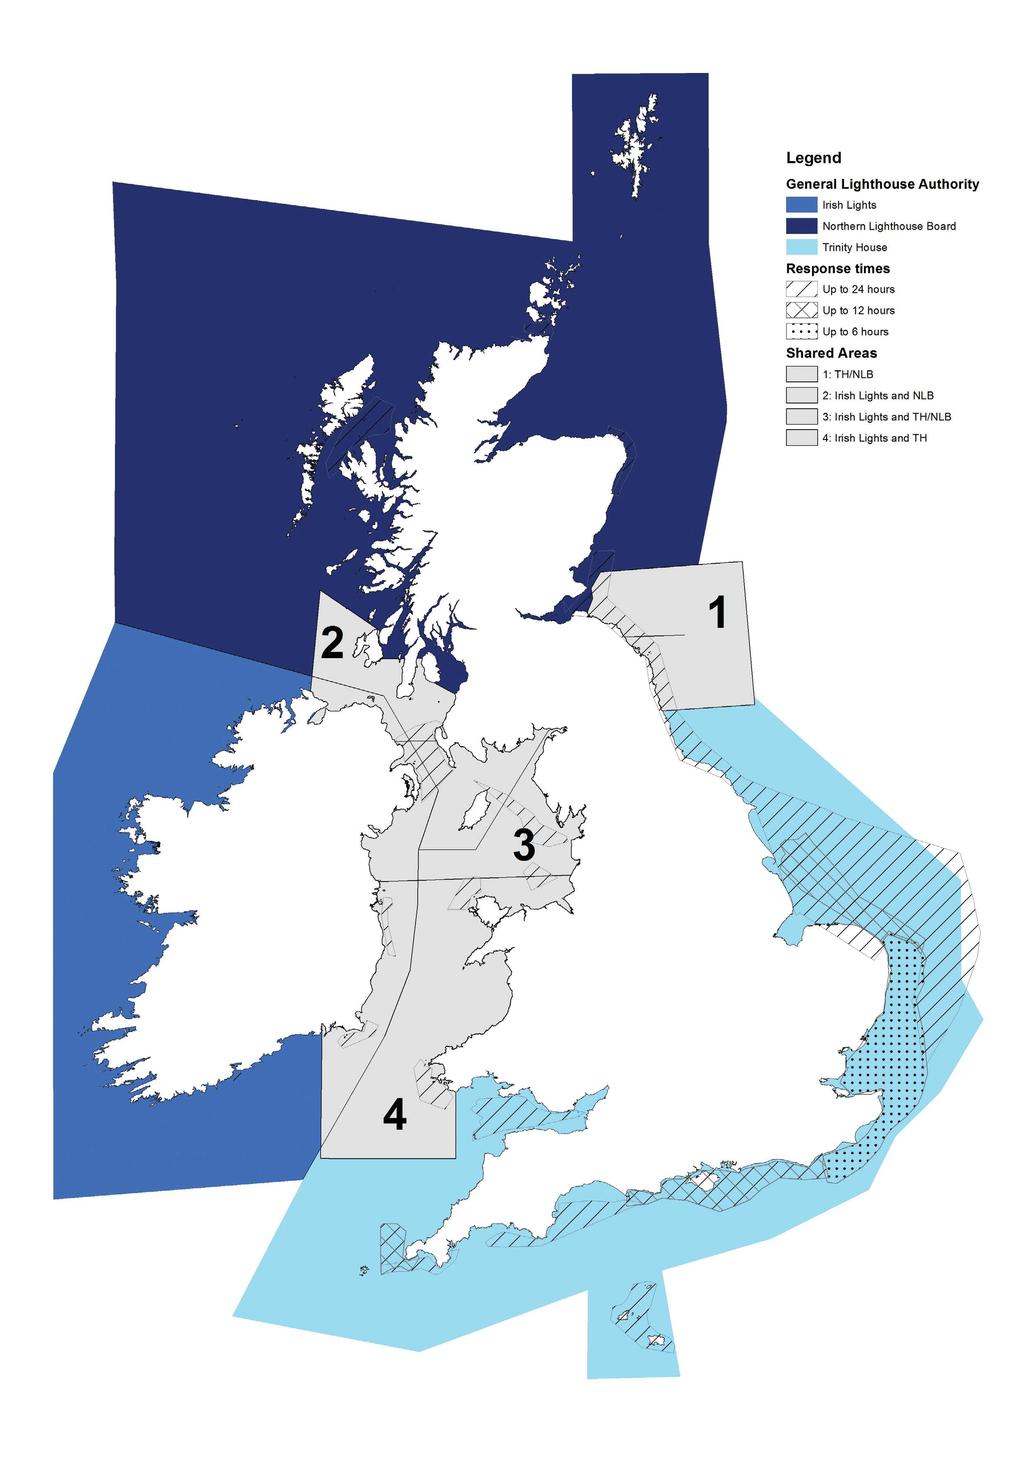 Risk response and shared areas for the General Lighthouse Authorities of Ireland, Scotland, England and Wales Cover Image: Crown Copyright